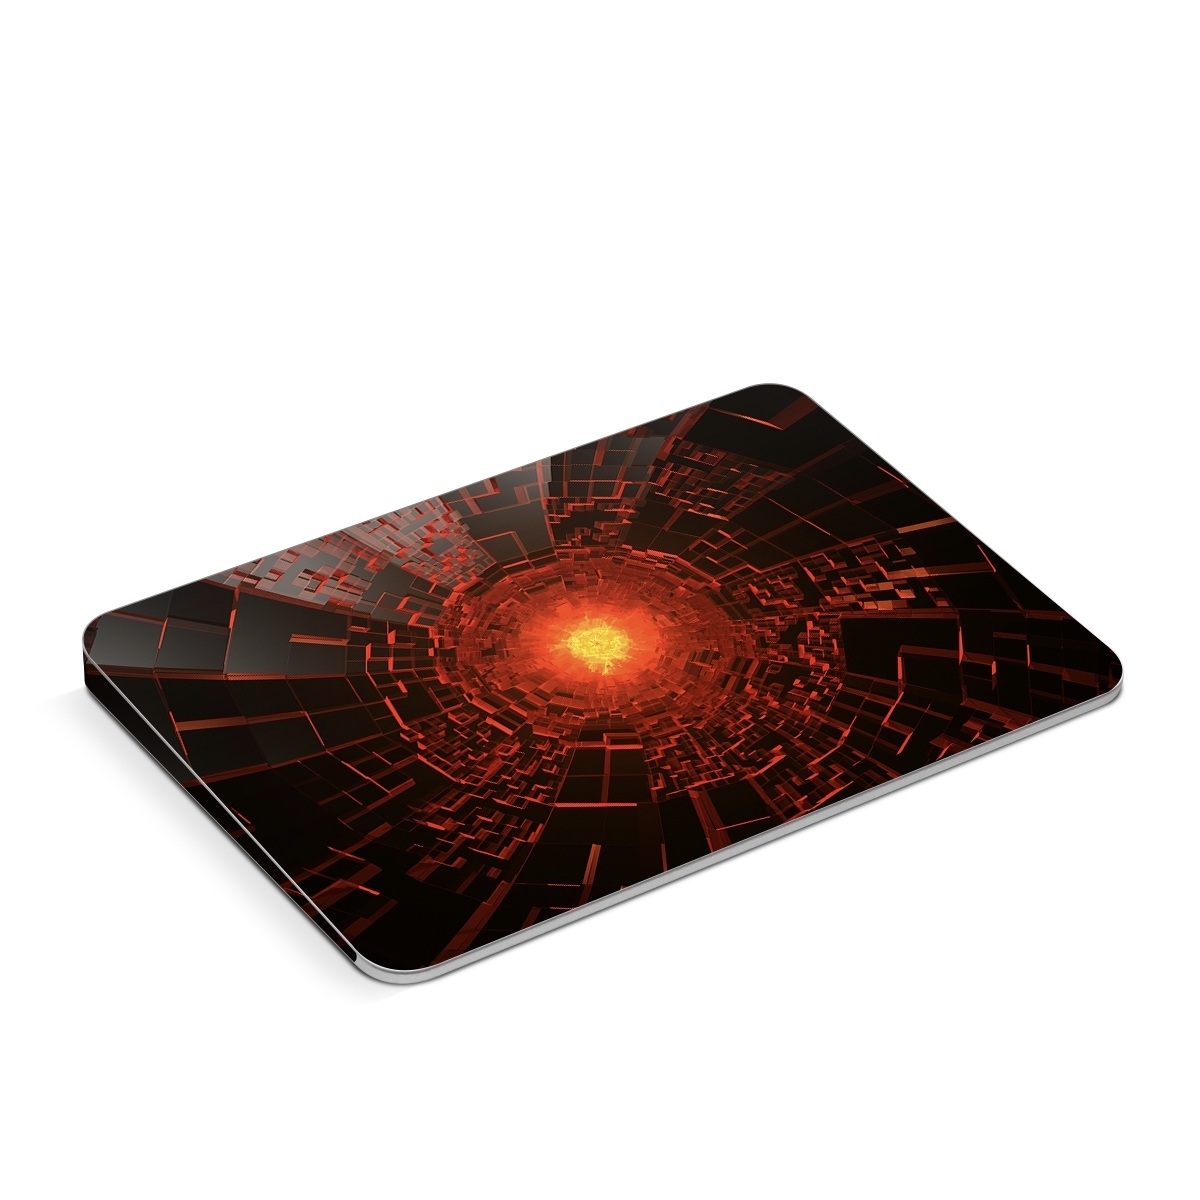 Apple Magic Trackpad Skin design of Red, Fractal art, Light, Circle, Design, Art, Graphics, Symmetry, Pattern, Space, with black, red colors